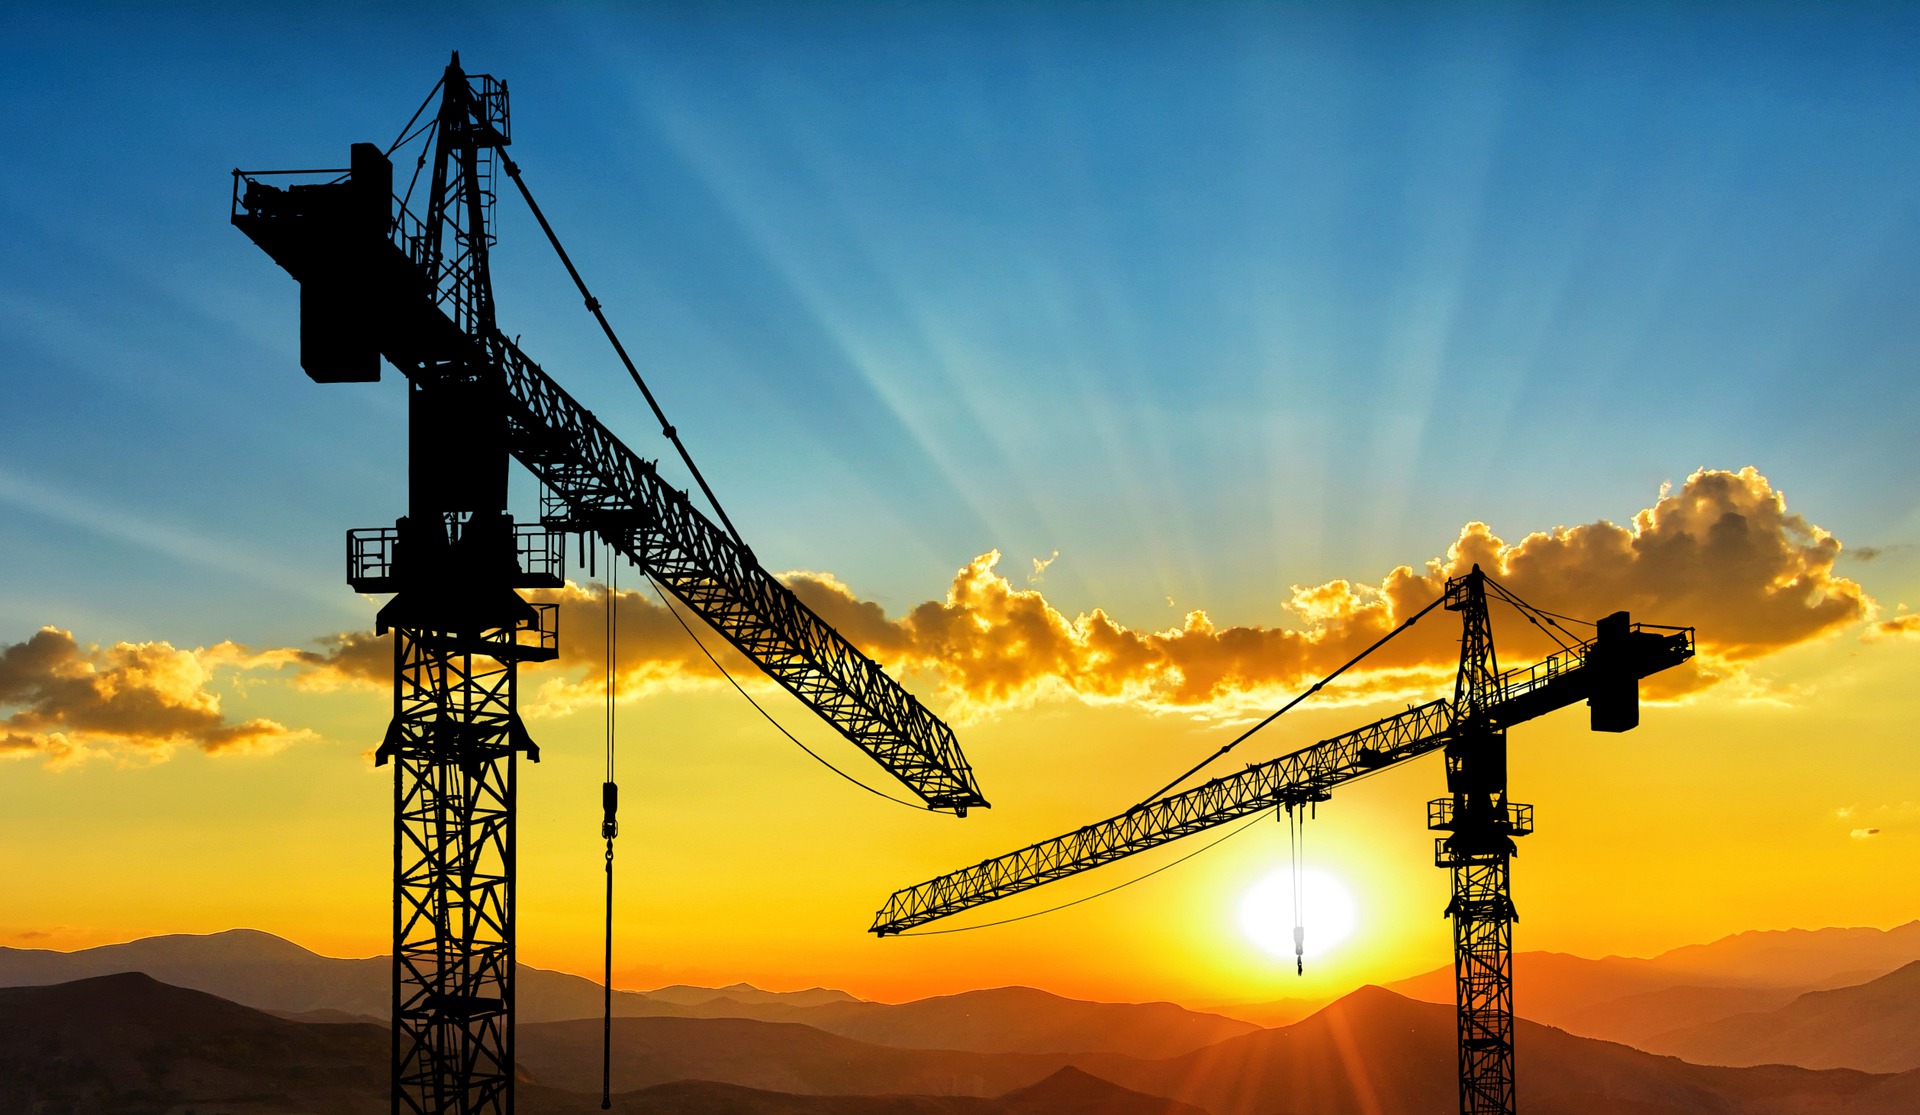 2022 construction forecast: Healthcare, retail, industrial sectors to lead a ‘healthy rebound’ for nonresidential construction